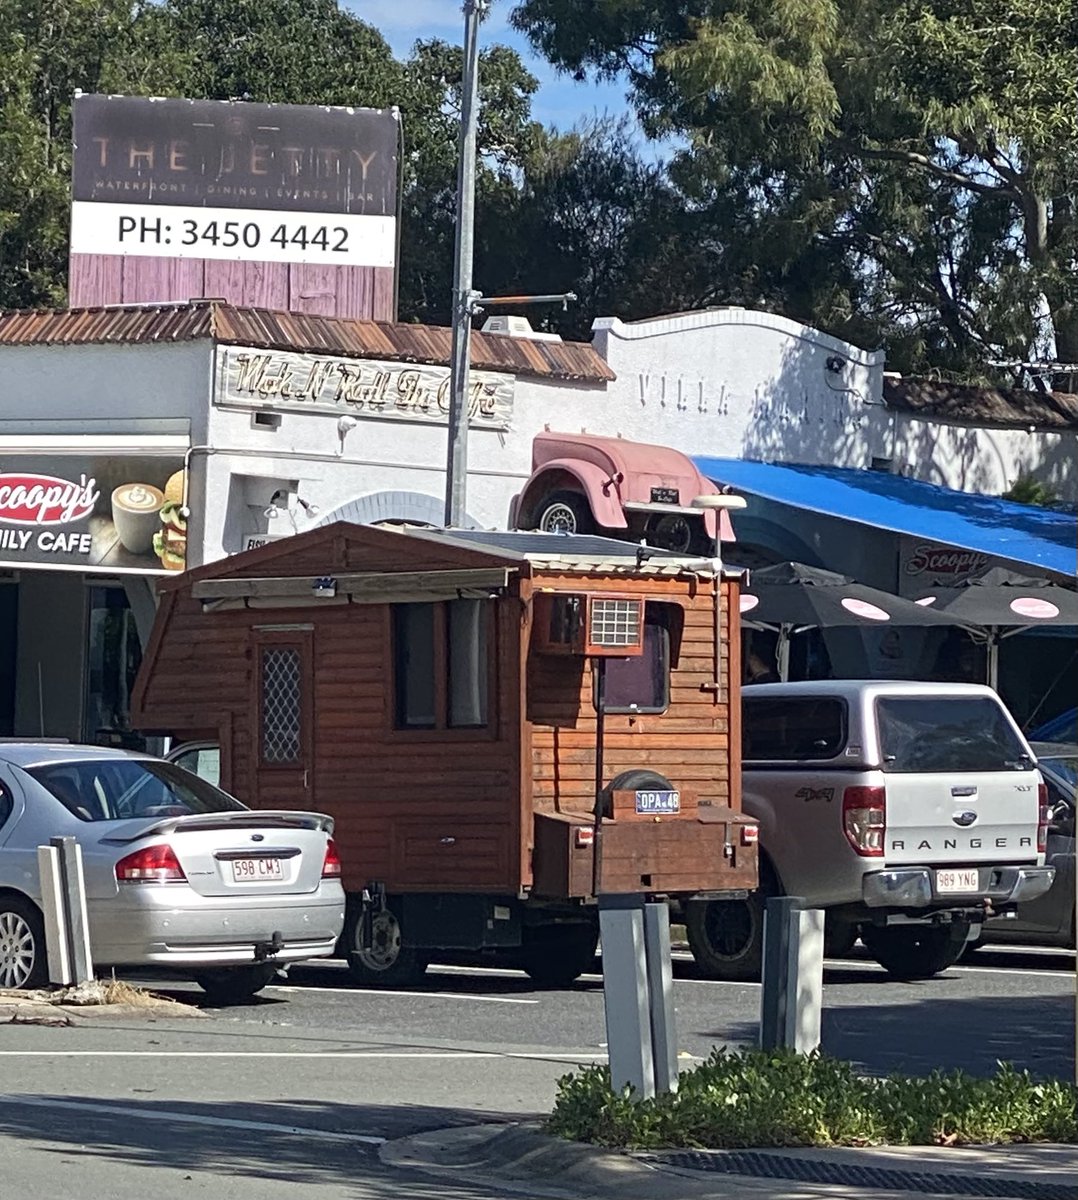 Saw this on the way back from our walk today. So, is this a really tiny home, an old motor home with a difference or a food truck. My guess is it belongs to a grey nomad who wanted a custom built campervan . What do you think? #Campervan #RVLife